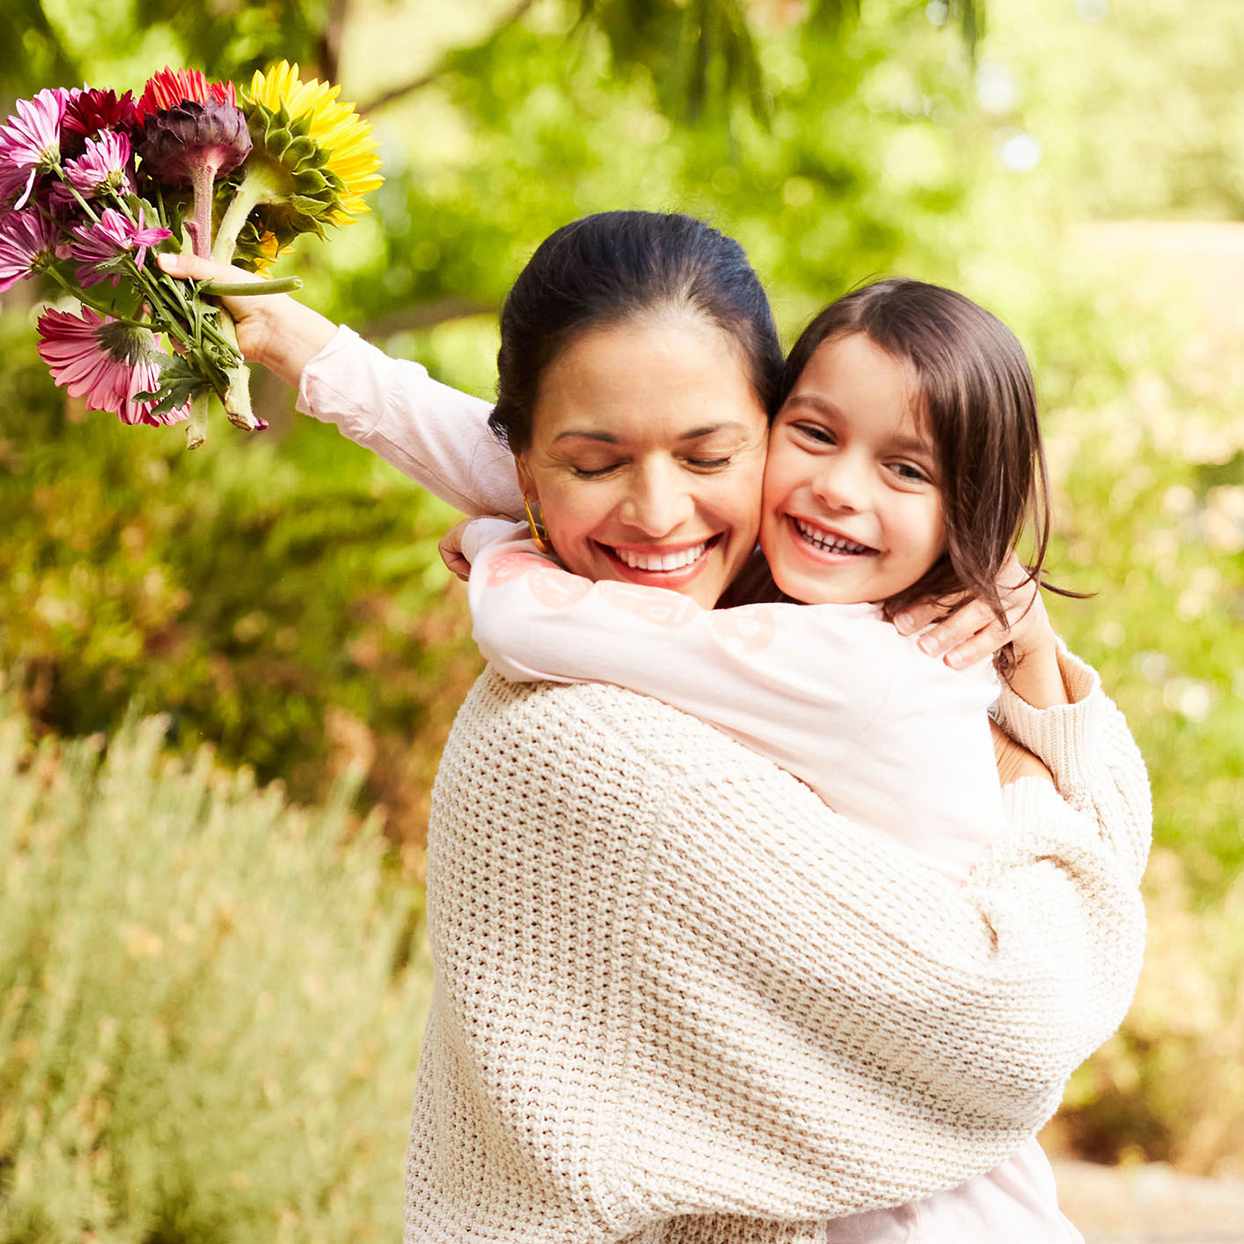 woman hugging child holding flowers